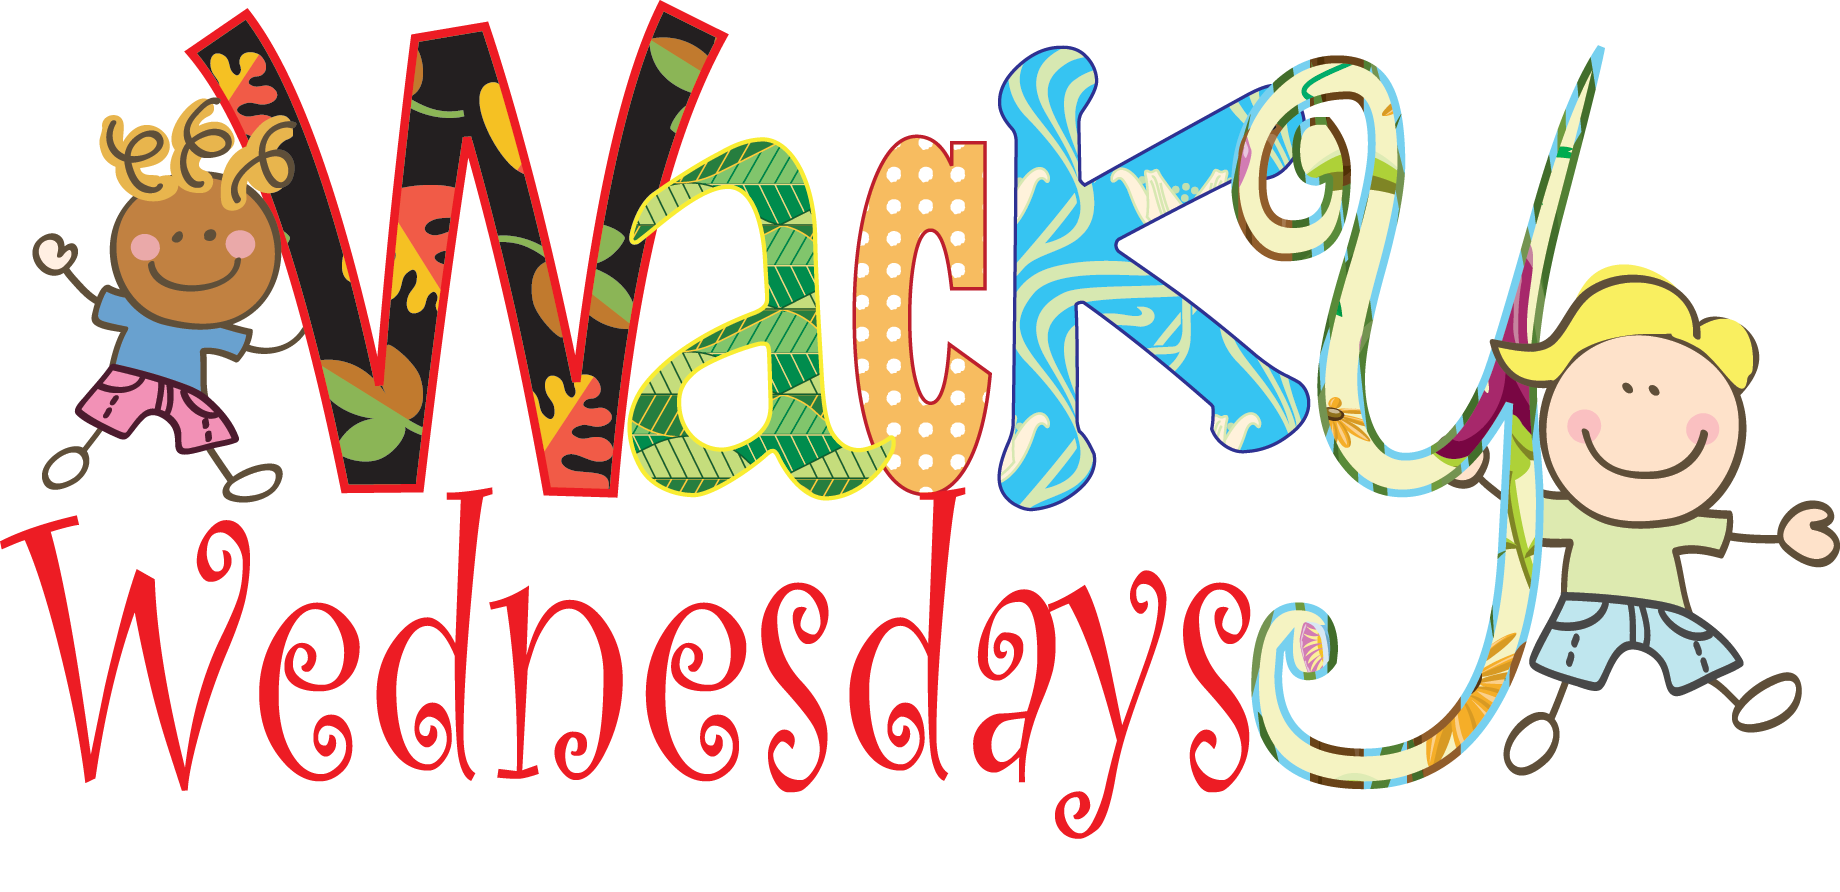 Clip Arts Related To : dr seuss wacky wednesday clipart. view all Wacky C.....